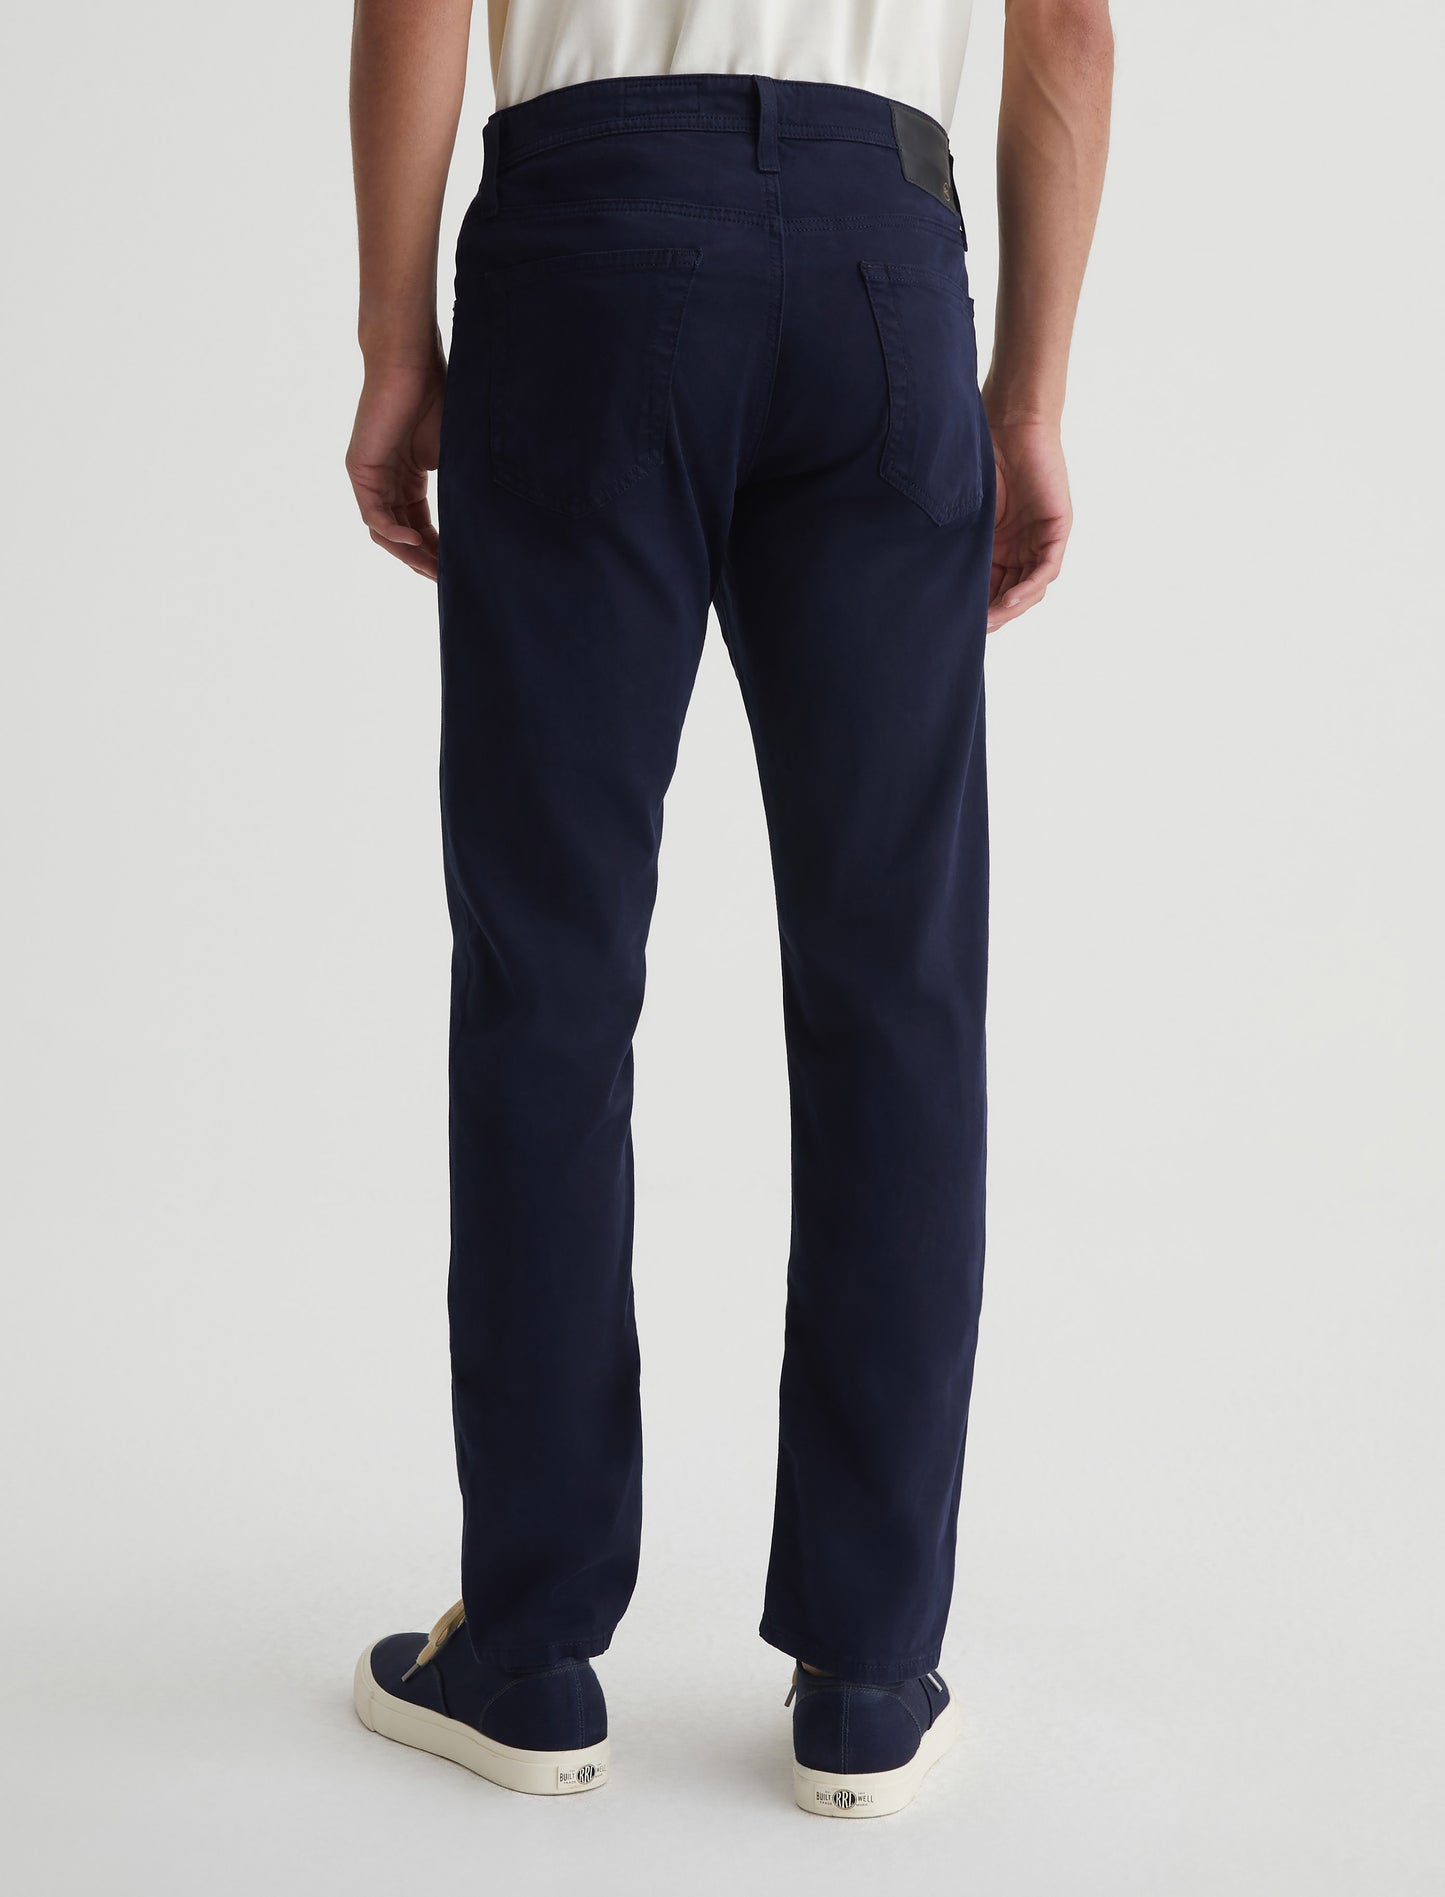 Mens Tellis Rich Navy at AG Official Store